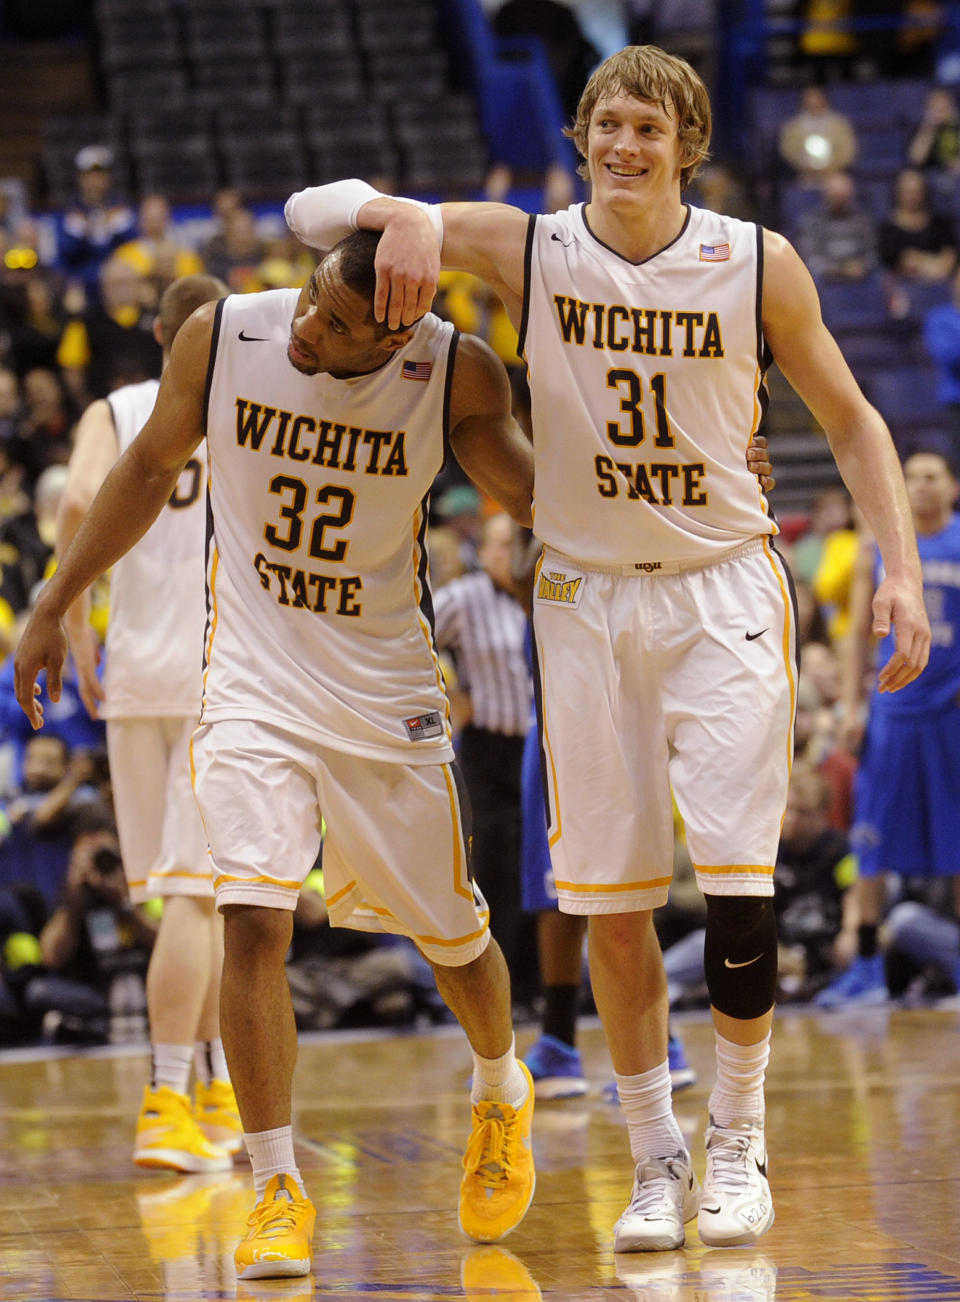 Wichita State's Ron Baker (31) and Tekele Cotton (32) celebrate late in the second half of an NCAA college basketball game against Indiana State for the championship of the Missouri Valley Conference Sunday, March 9, 2014, in St. Louis. (AP Photo/Bill Boyce)